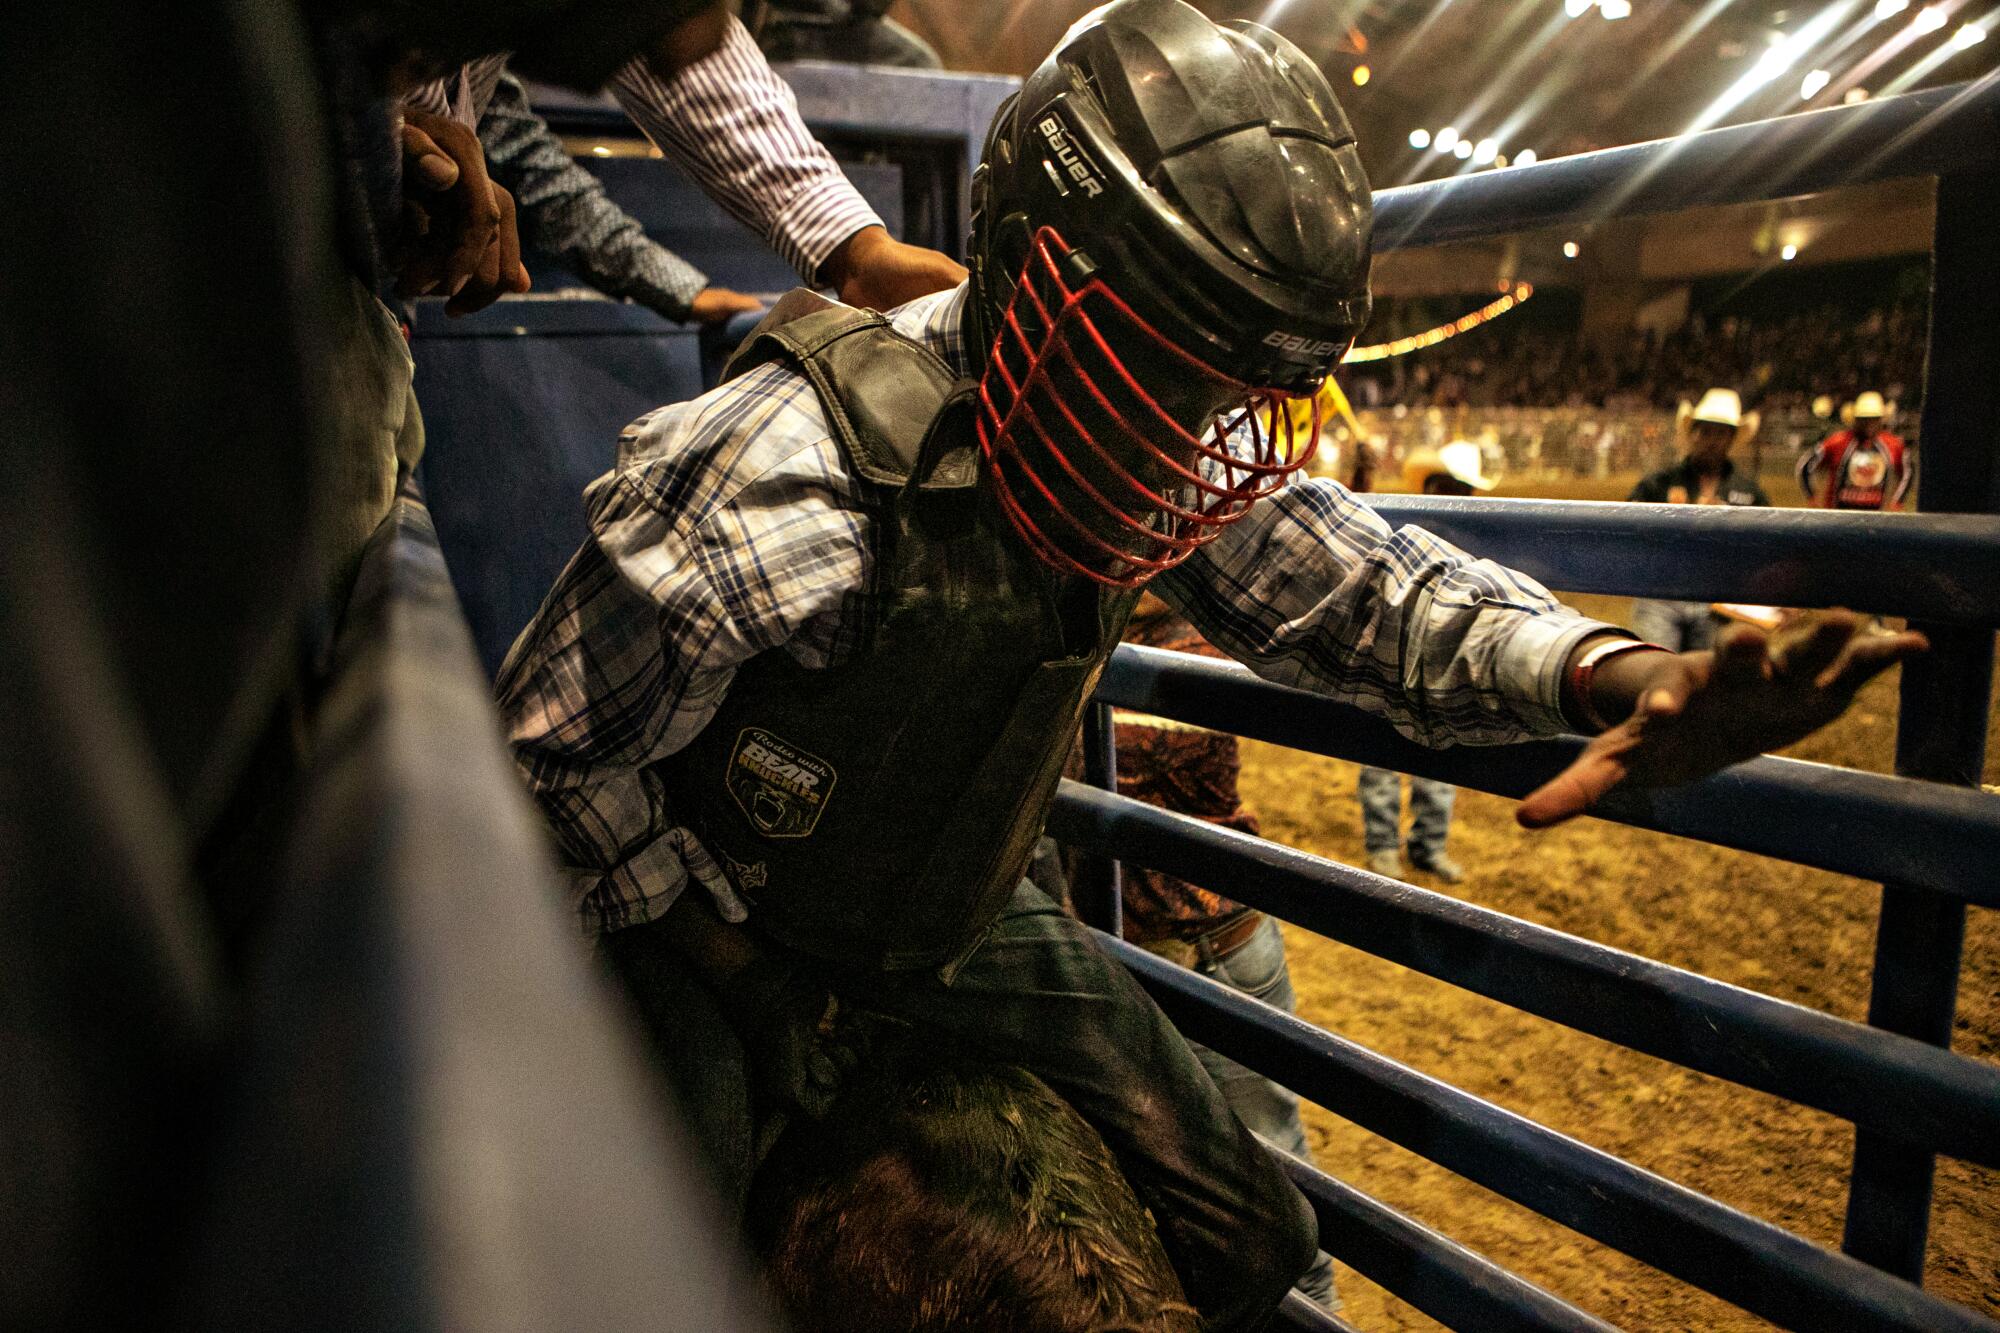 Hands reaching down to help boy in a helmet settle on to a bull in a chute